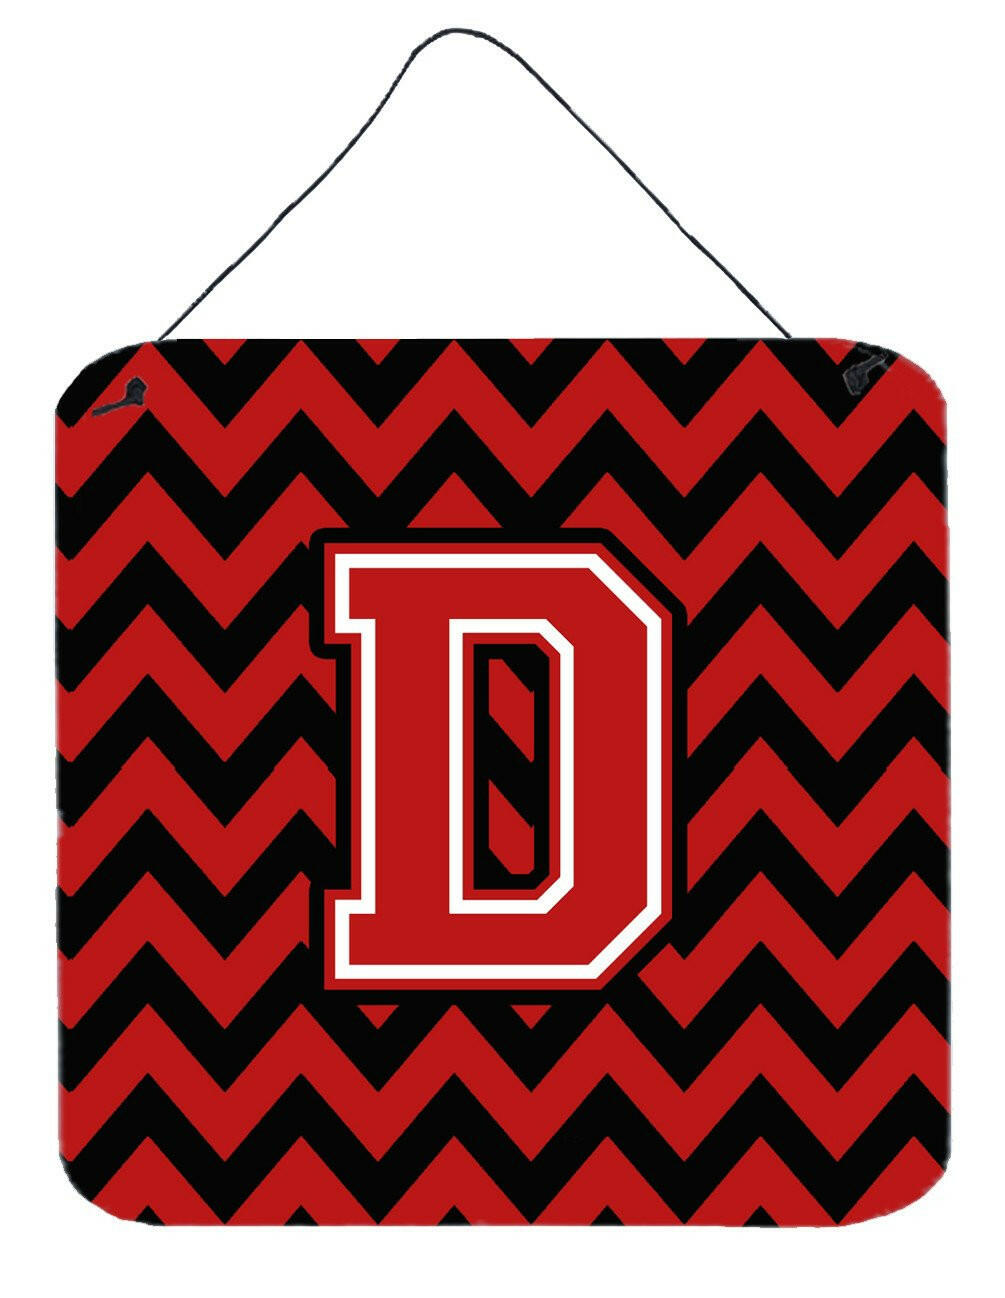 Letter D Chevron  Black and Red   Wall or Door Hanging Prints CJ1047-DDS66 by Caroline's Treasures